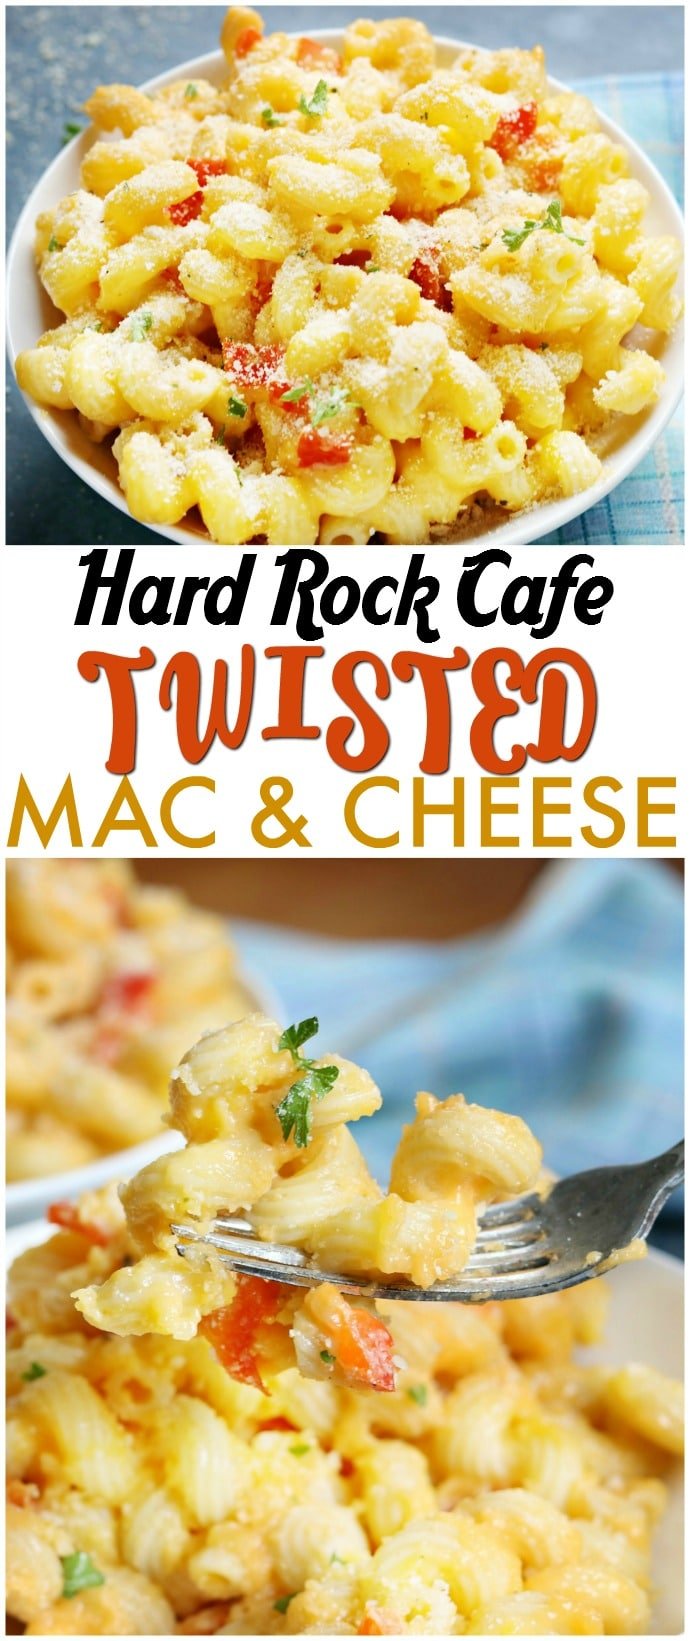 Hard Rock Cafe Twisted Mac & Cheese is cavatappi pasta tossed in a slightly spicy cheese sauce with roasted red peppers and topped with Parmesan parsley breadcrumbs. A copycat version of a favorite restaurant dish! | www.persnicketyplates.com